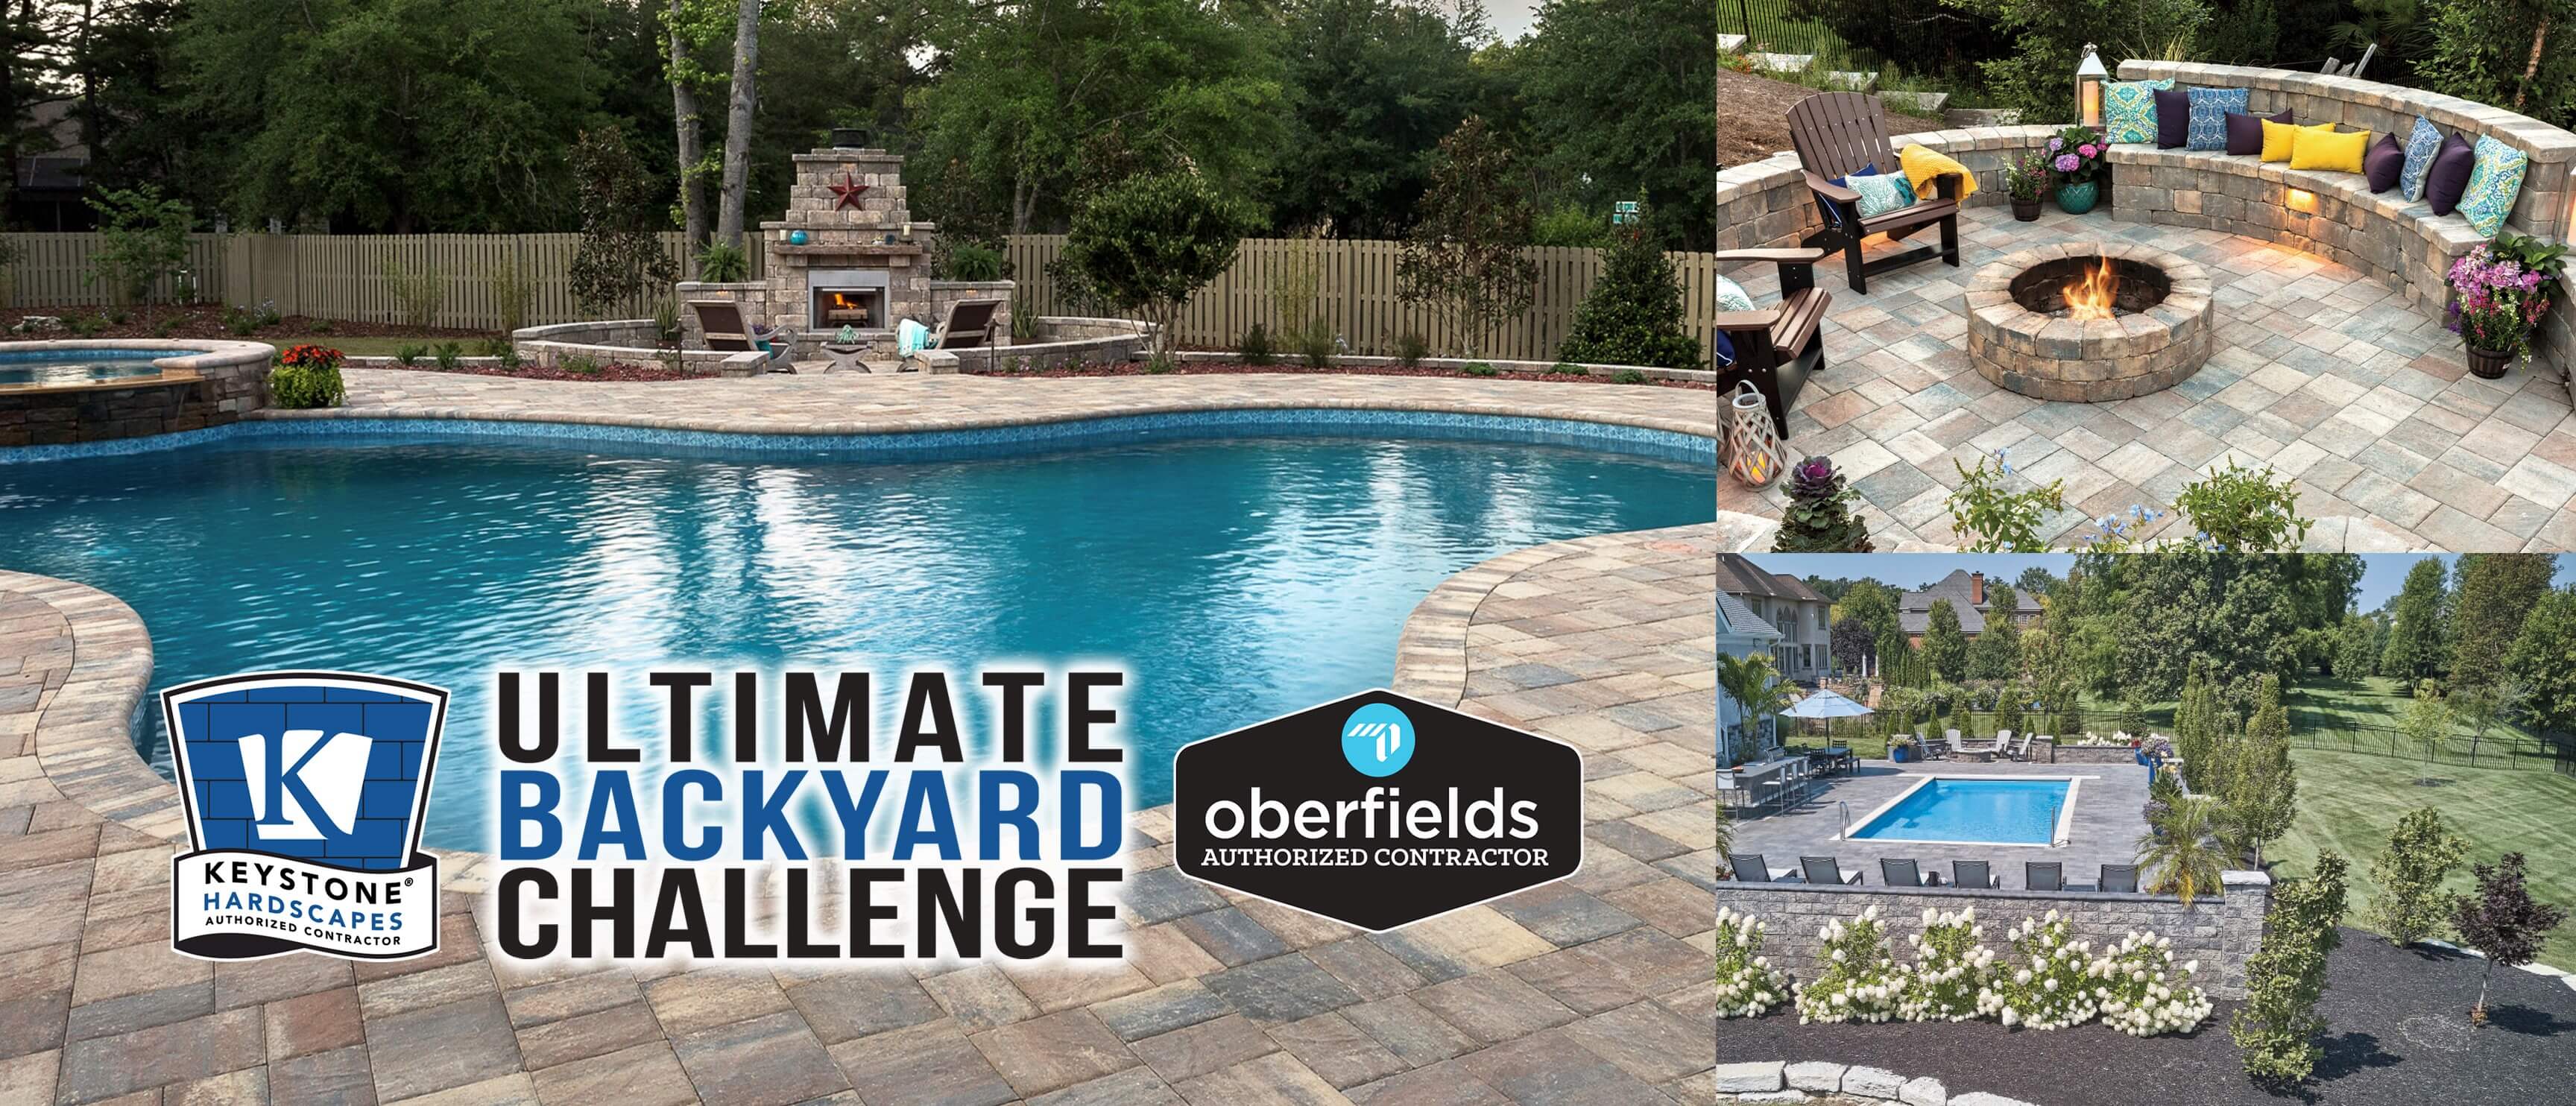 Connect with an Oberfields Authorized Contractor